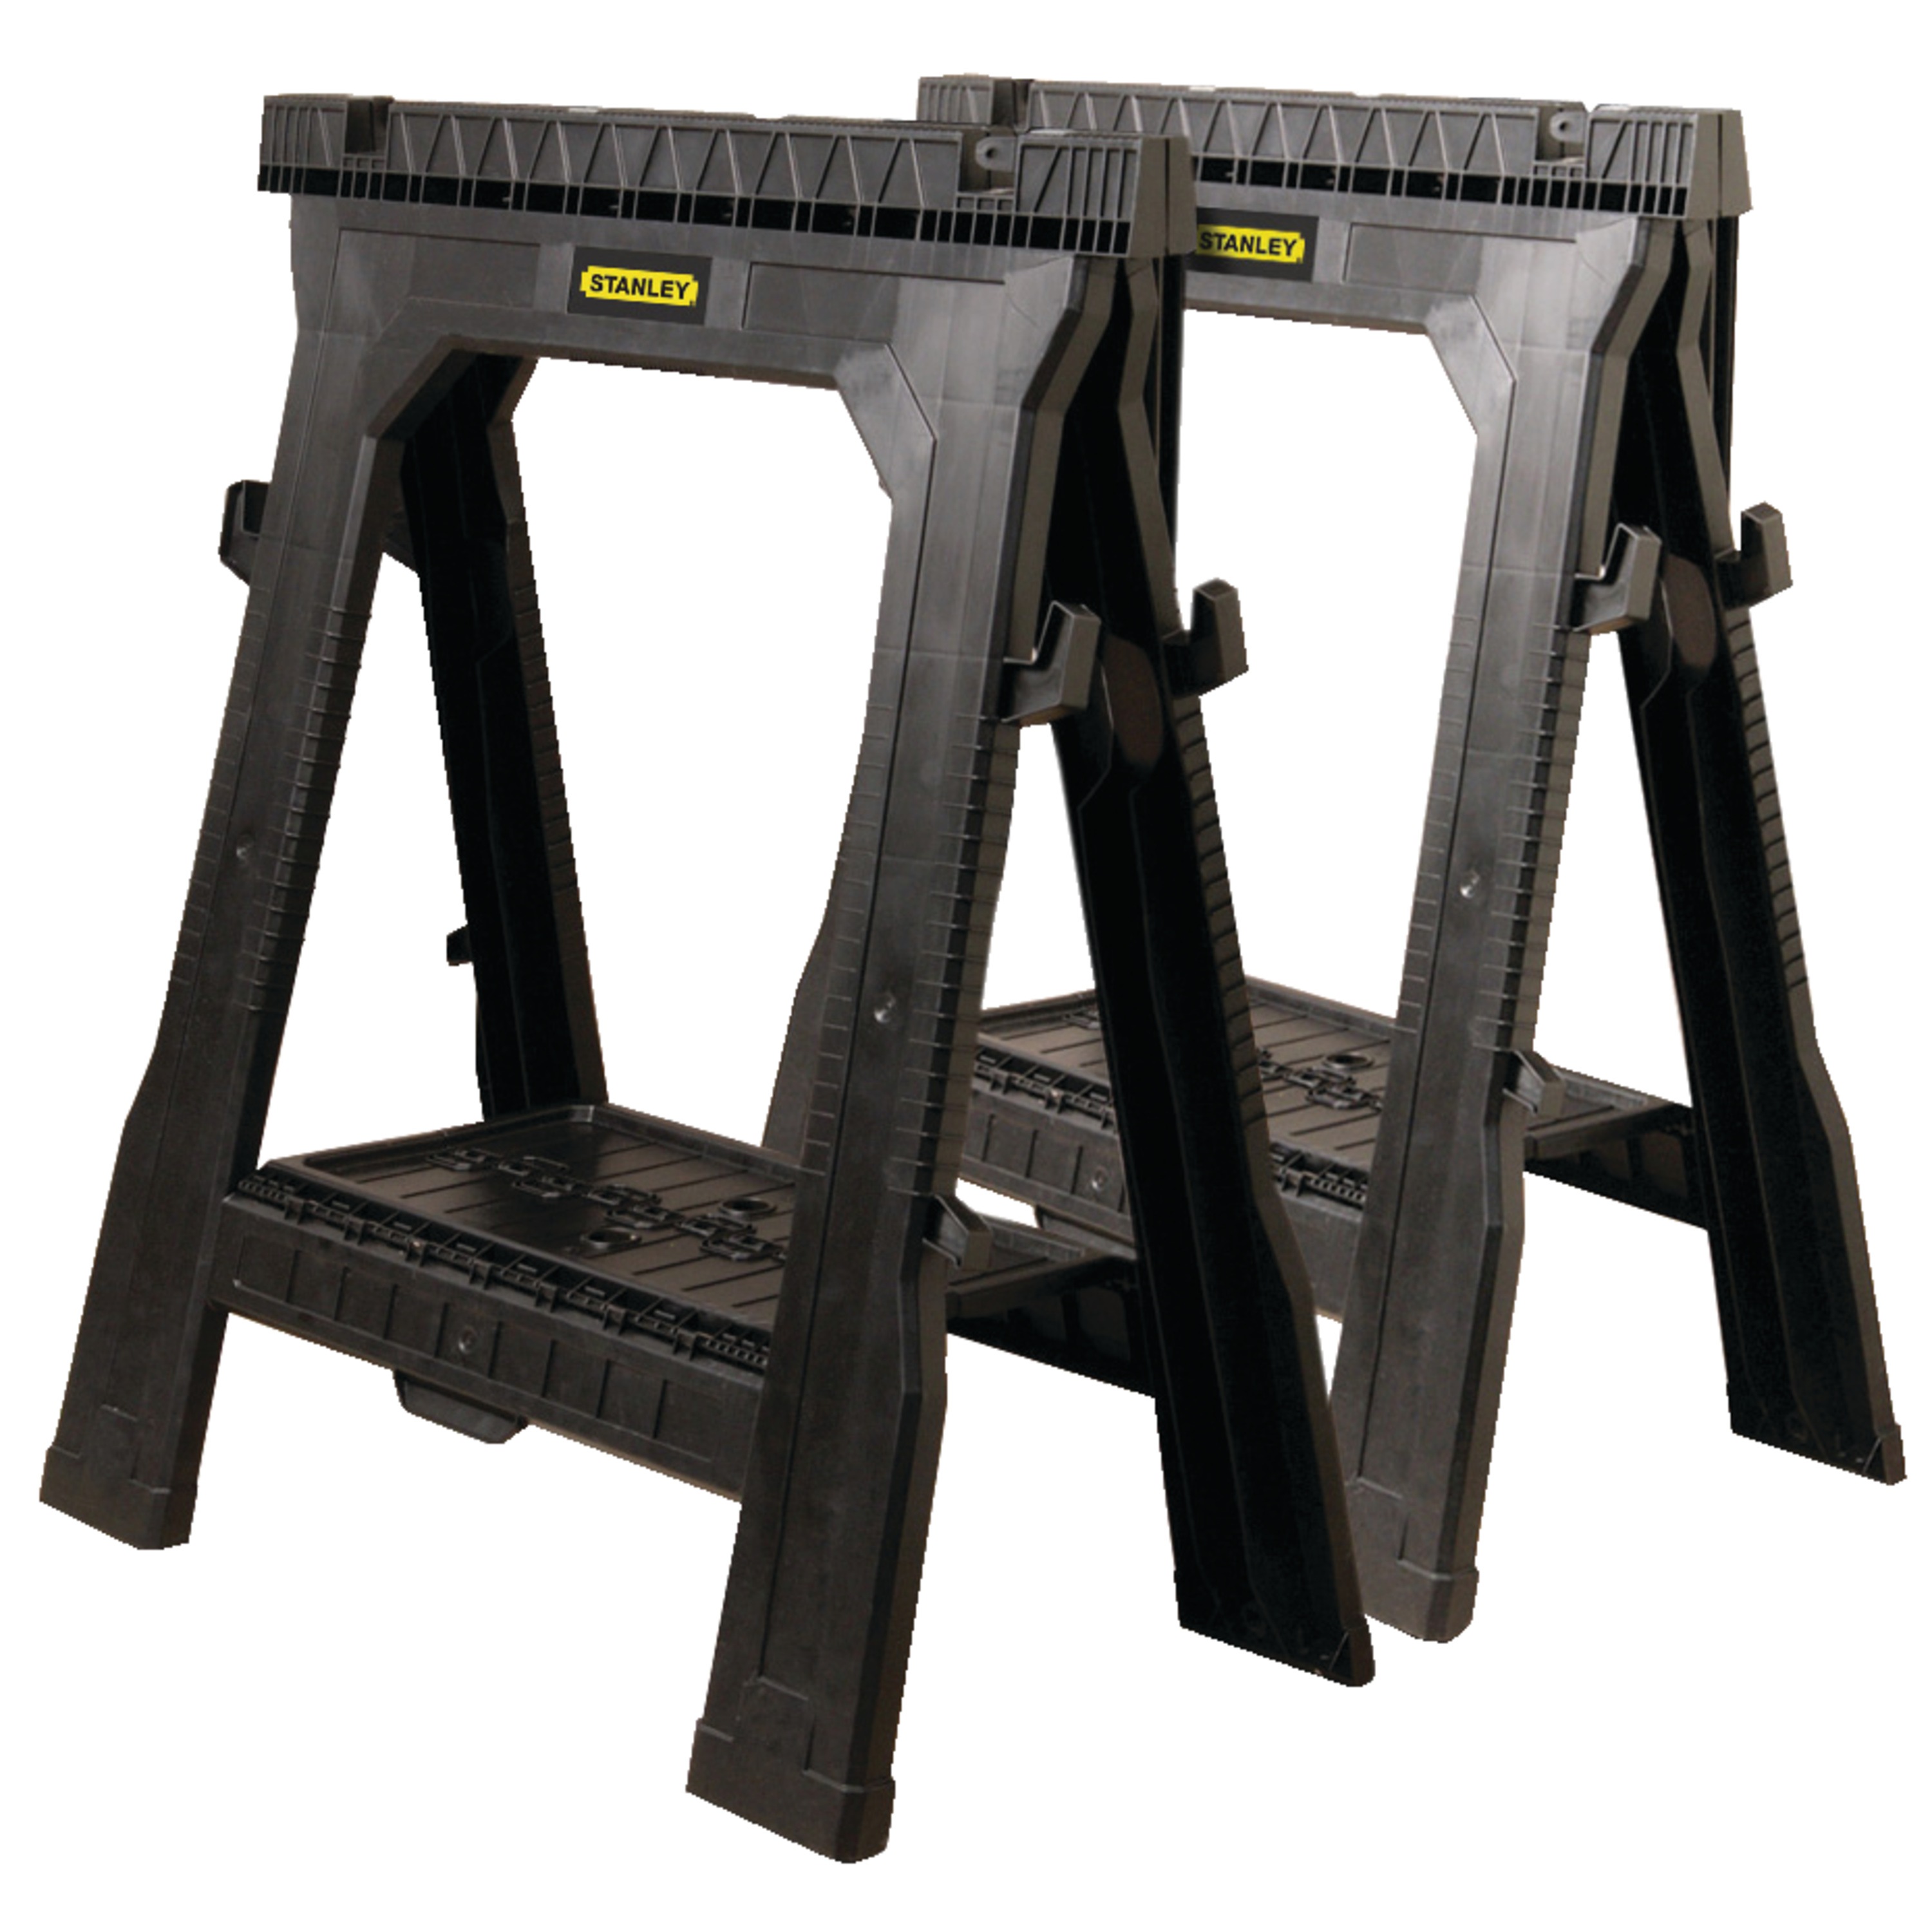 Stanley Tools - Portable Folding Sawhorse 2pack - 060864R